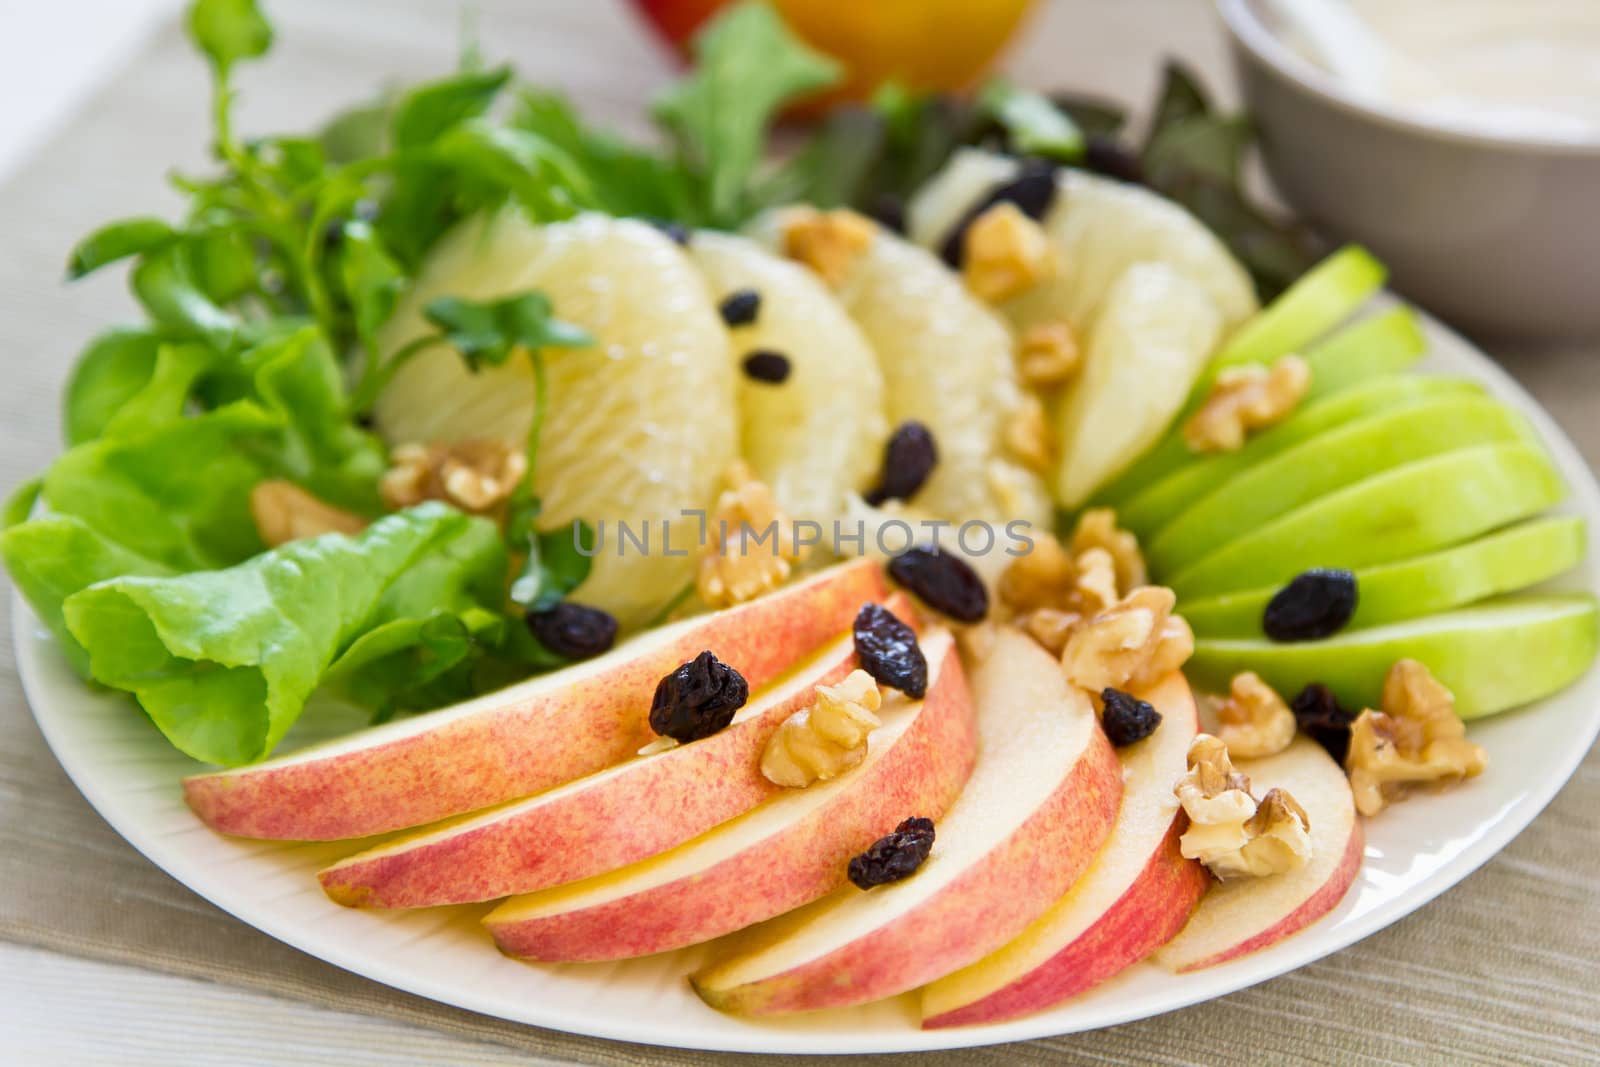 Apple with Grapefruit  and walnut salad by vanillaechoes